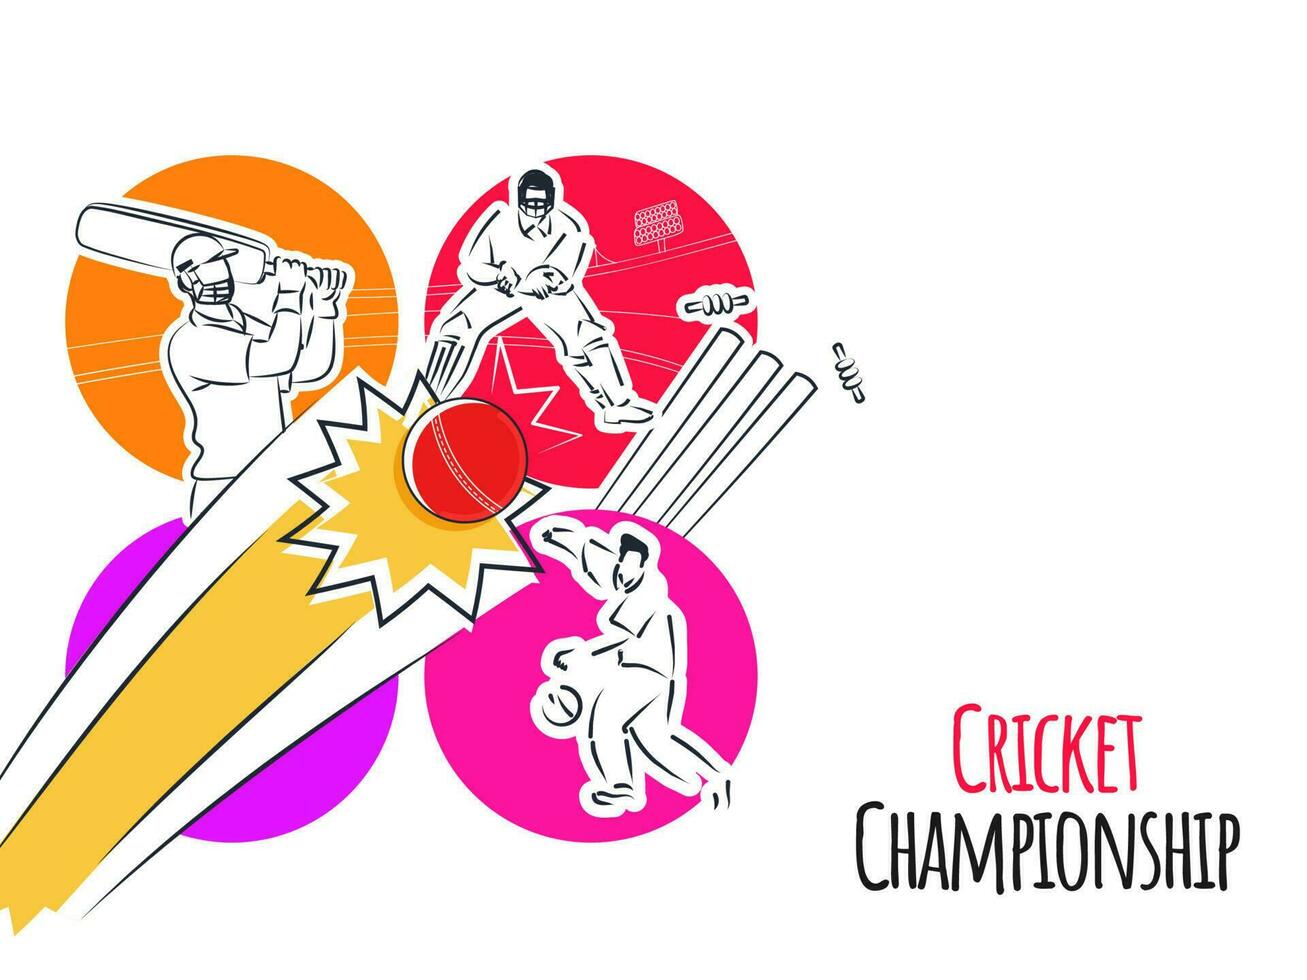 Cricket Championship Concept With Cricketer Players In Different Poses On Colorful Background. vector